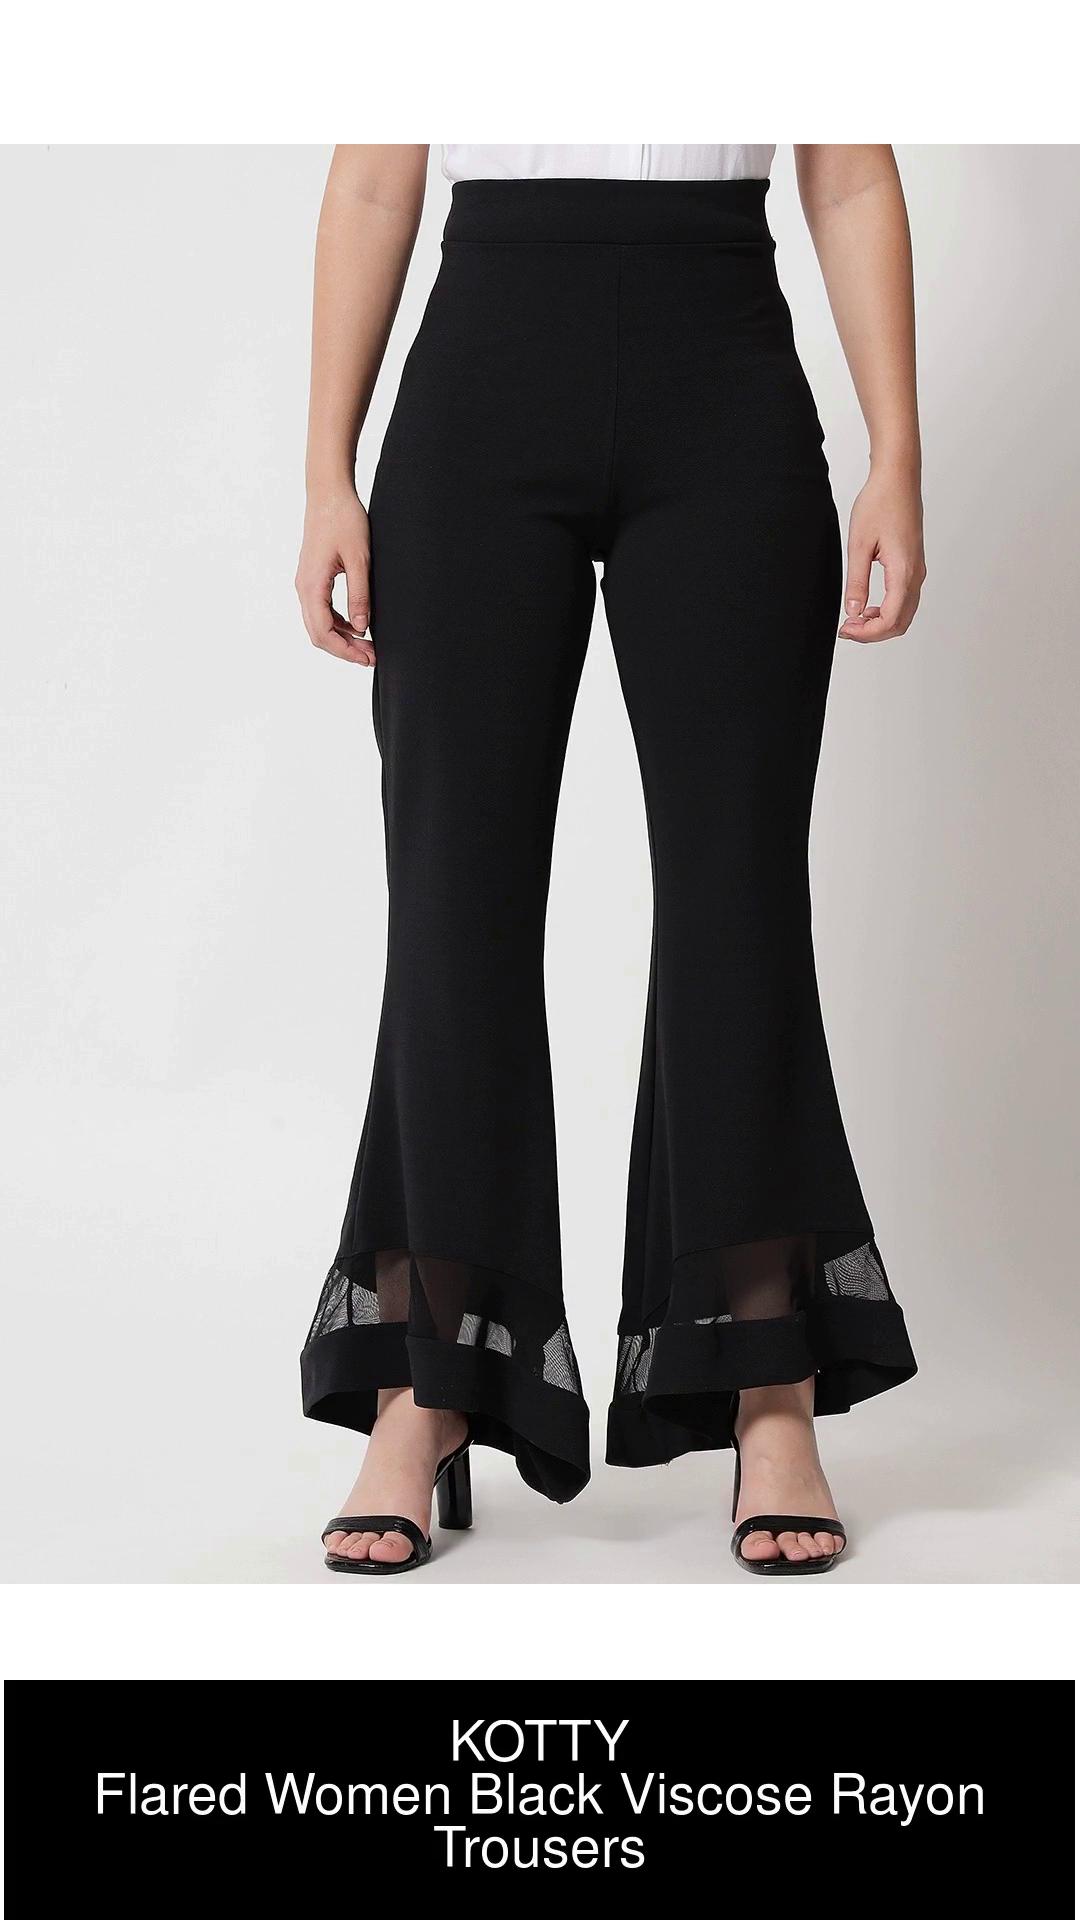 Theory High Rise Cropped Leggings